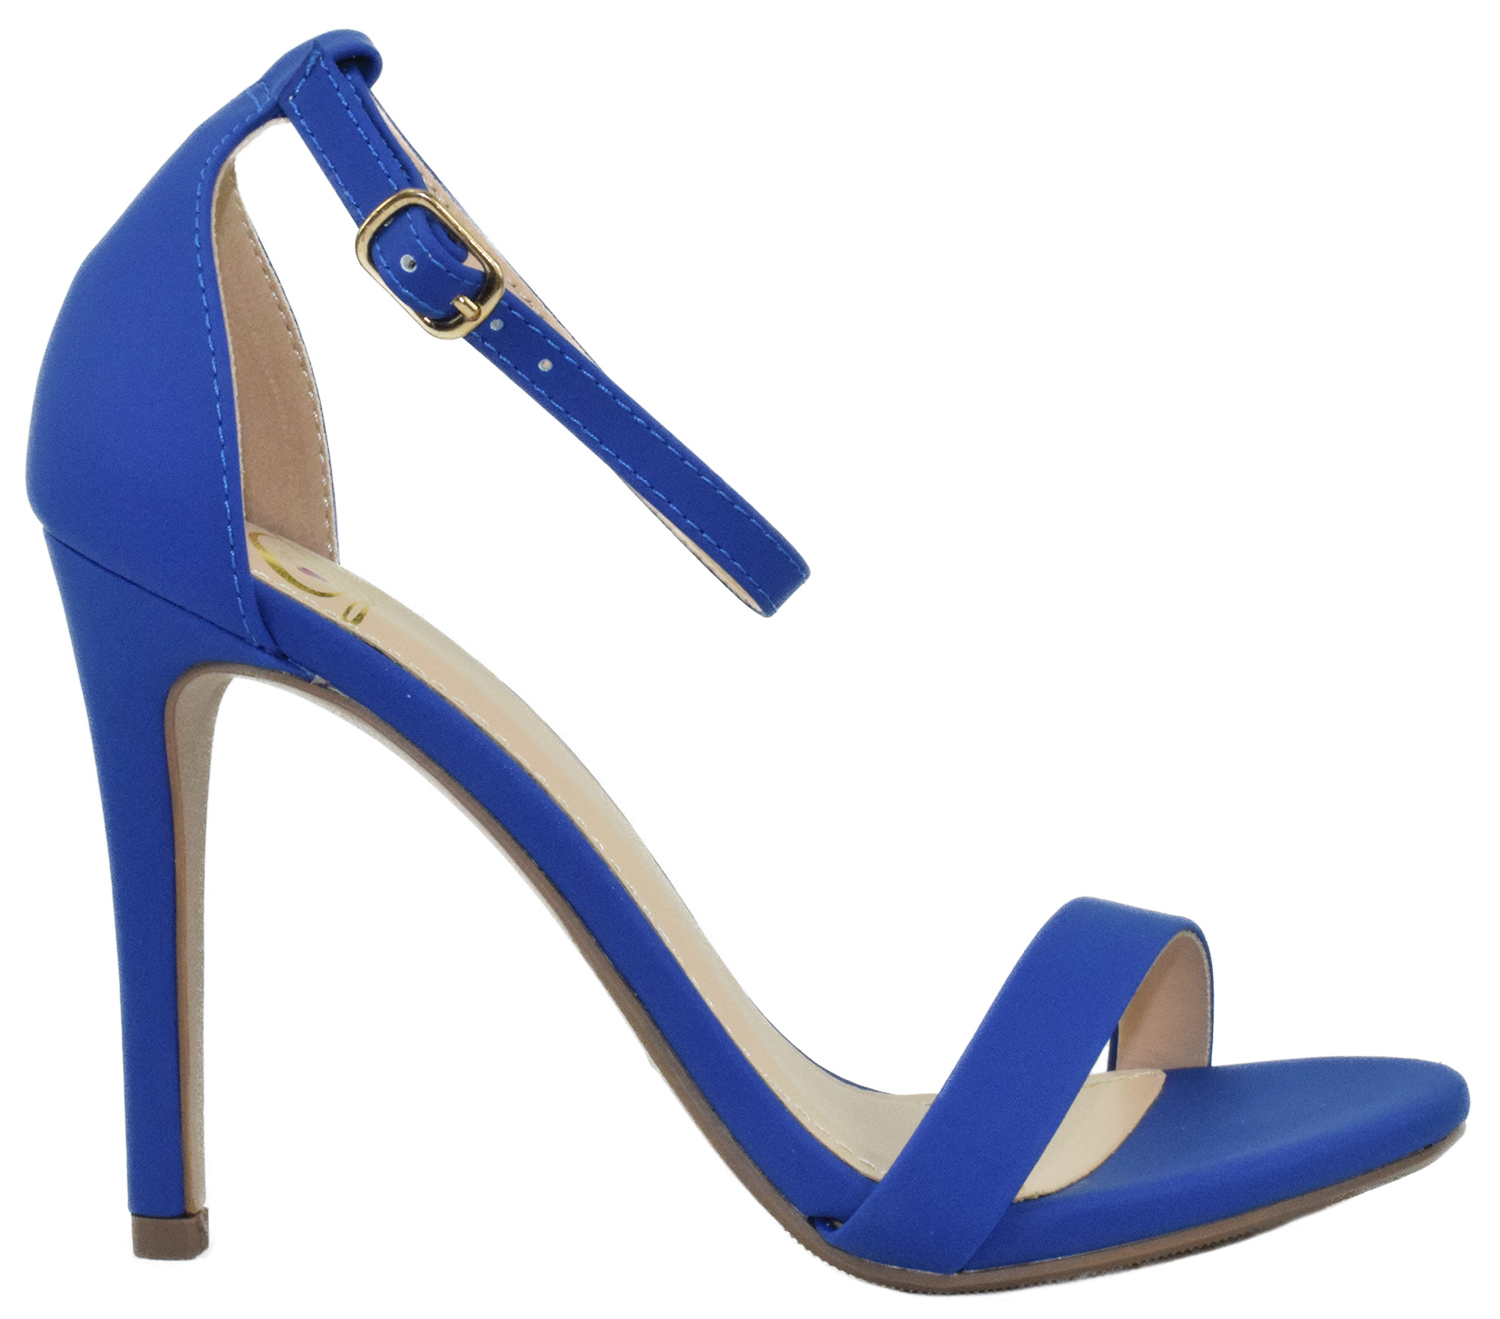 Delicious Shoes Women Ankle Strap High Heel Open Toe Formal/Casual Dress Sandals JAIDEN Royal Blue Cobalt 7 - image 2 of 2